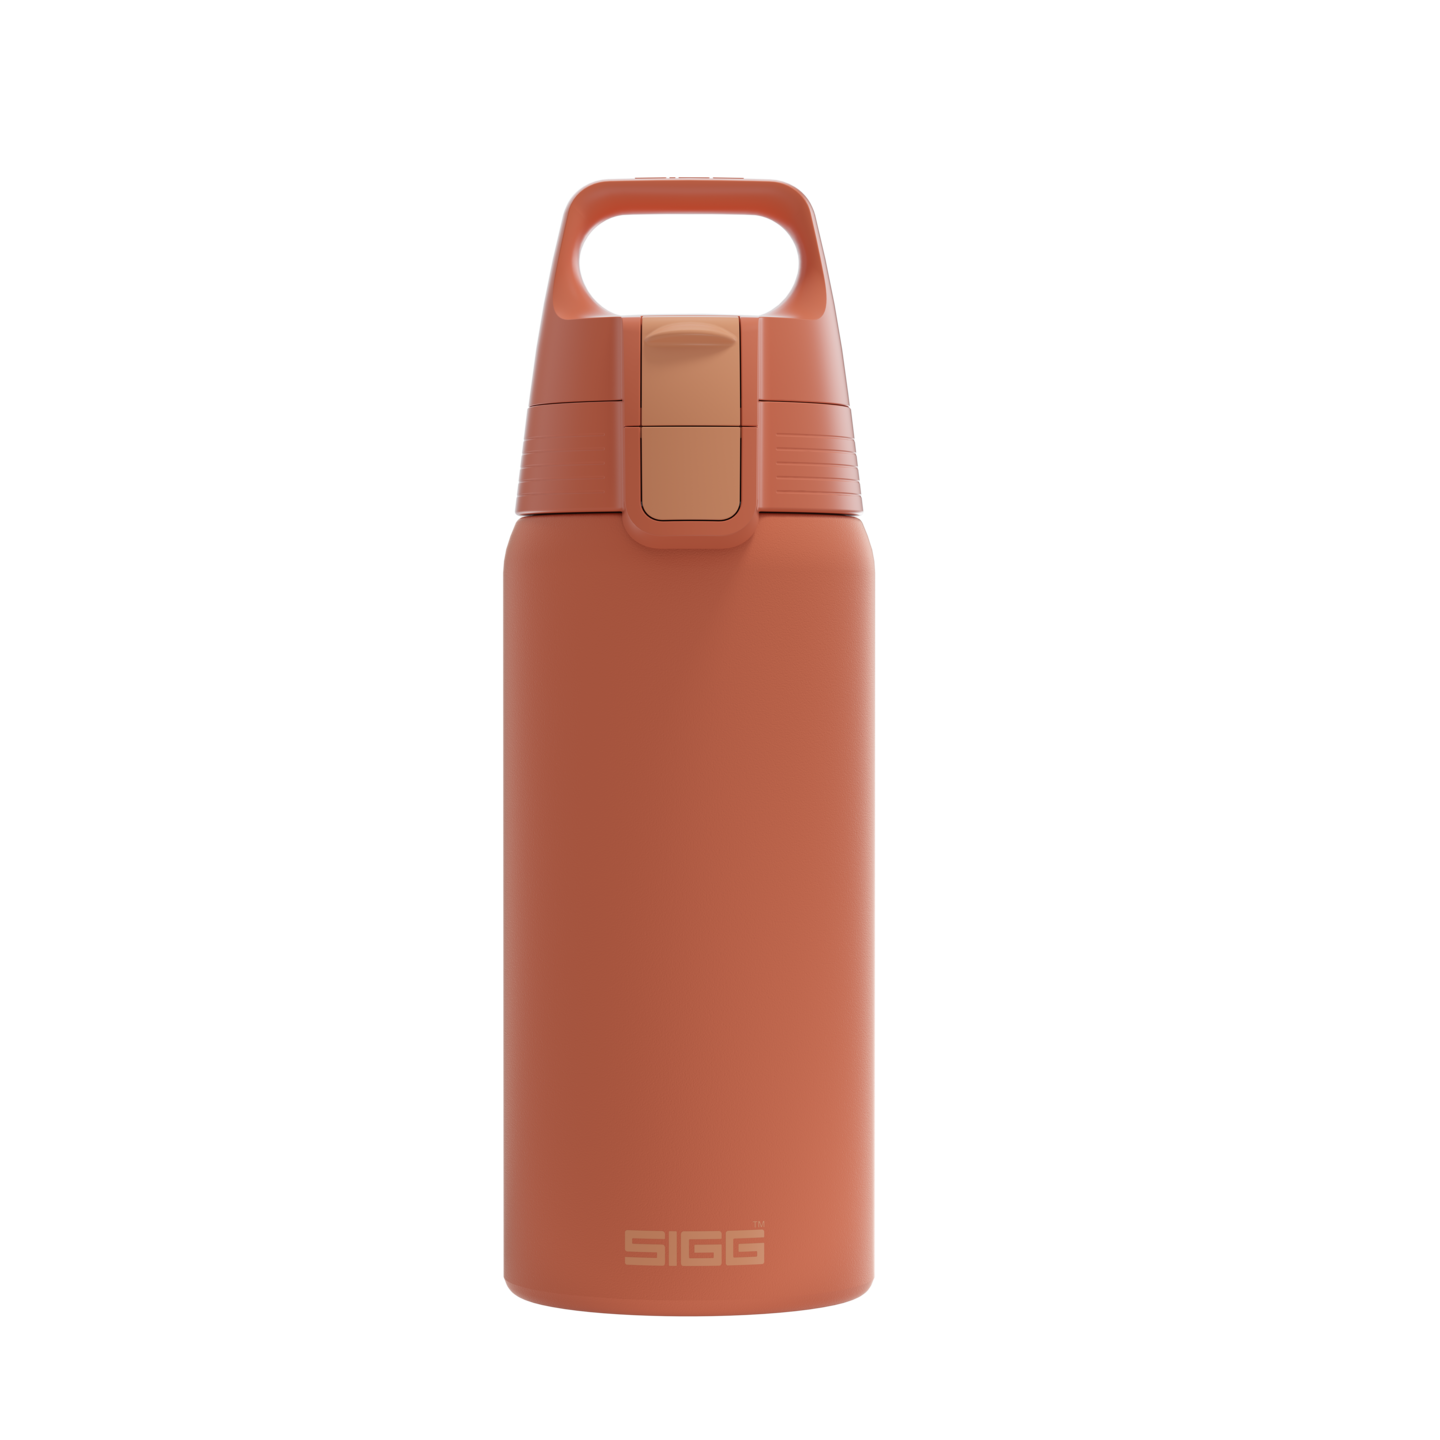 Shield Therm One Eco Red 0.5 L